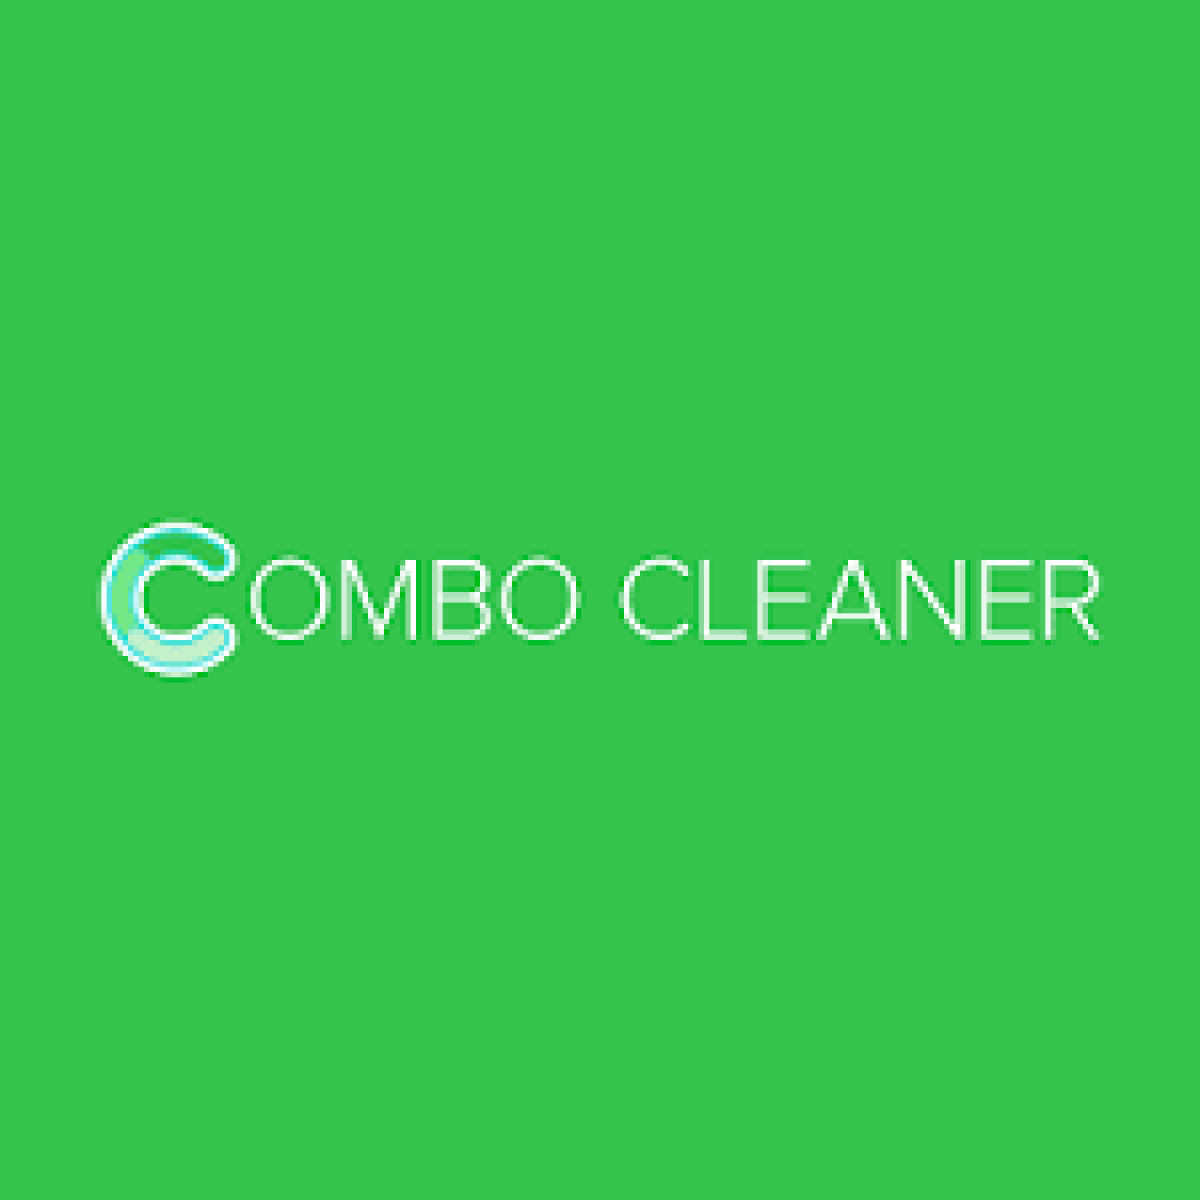 combo cleaner mac activation number